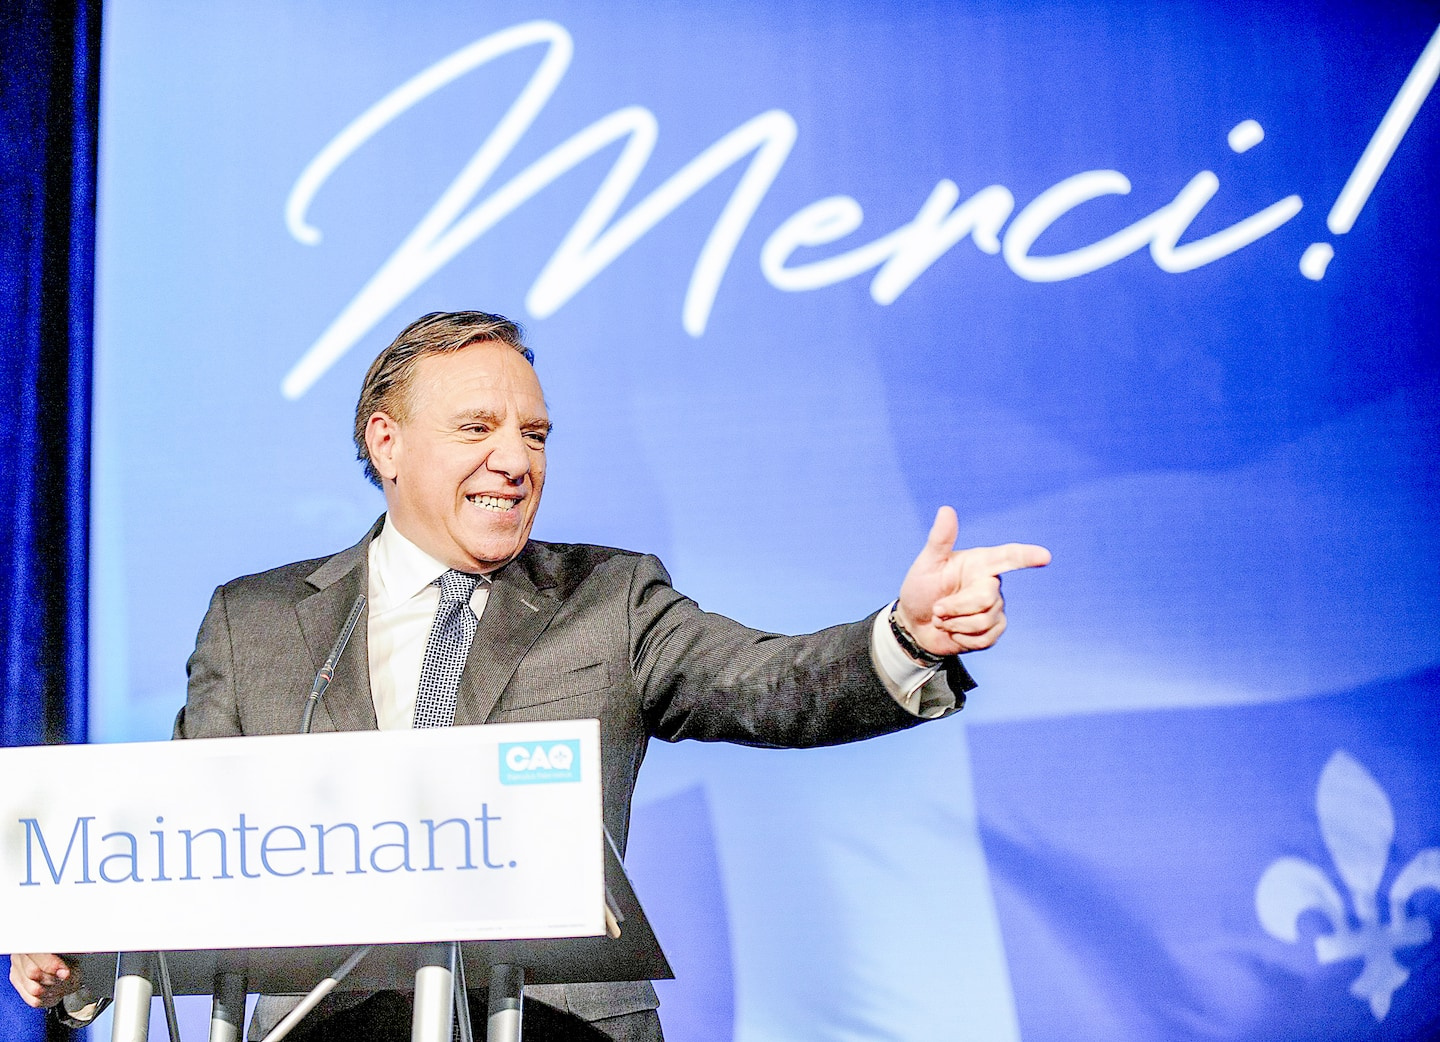 CAQ review: the victory of the third way